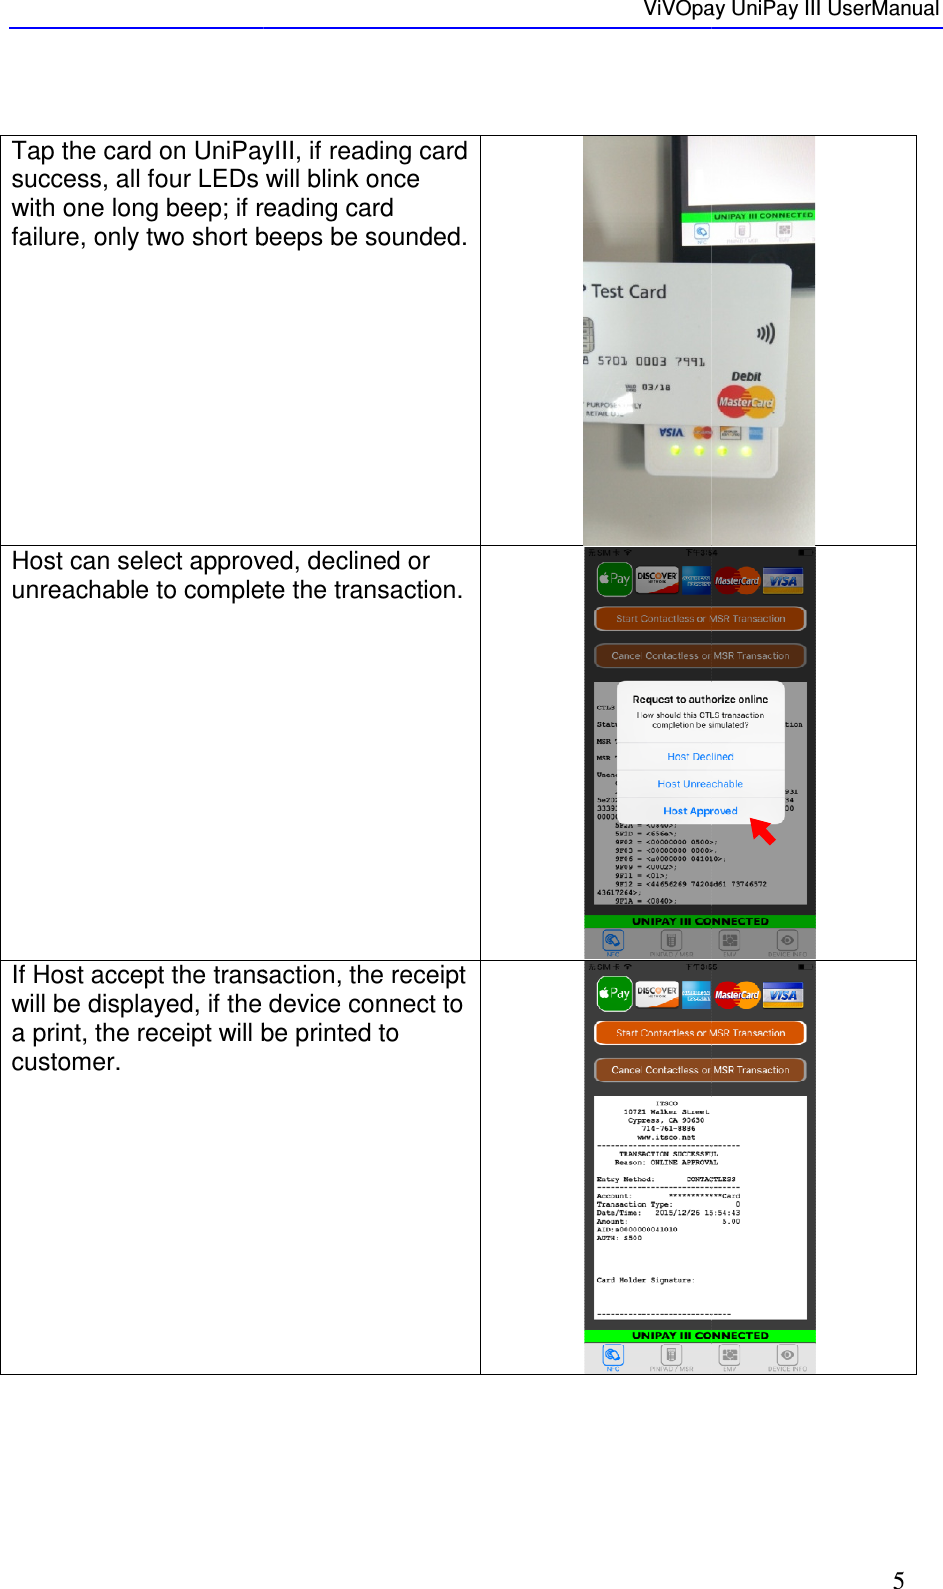       Tap the card on UniPayIII, if reading card success, all four LEDs will blink once with one long beep; if reading cafailure, only two short beeps be sounded. Host can select approved, declined or unreachable to complete the transaction.  If Host accept the transaction, the receipt will be displayed, if the device connect to a print, the receipt will be printed to customer.      ViVOpay Tap the card on UniPayIII, if reading card success, all four LEDs will blink once with one long beep; if reading card failure, only two short beeps be sounded.  Host can select approved, declined or unreachable to complete the transaction.   If Host accept the transaction, the receipt will be displayed, if the device connect to a print, the receipt will be printed to ViVOpay UniPay III UserManual 5    